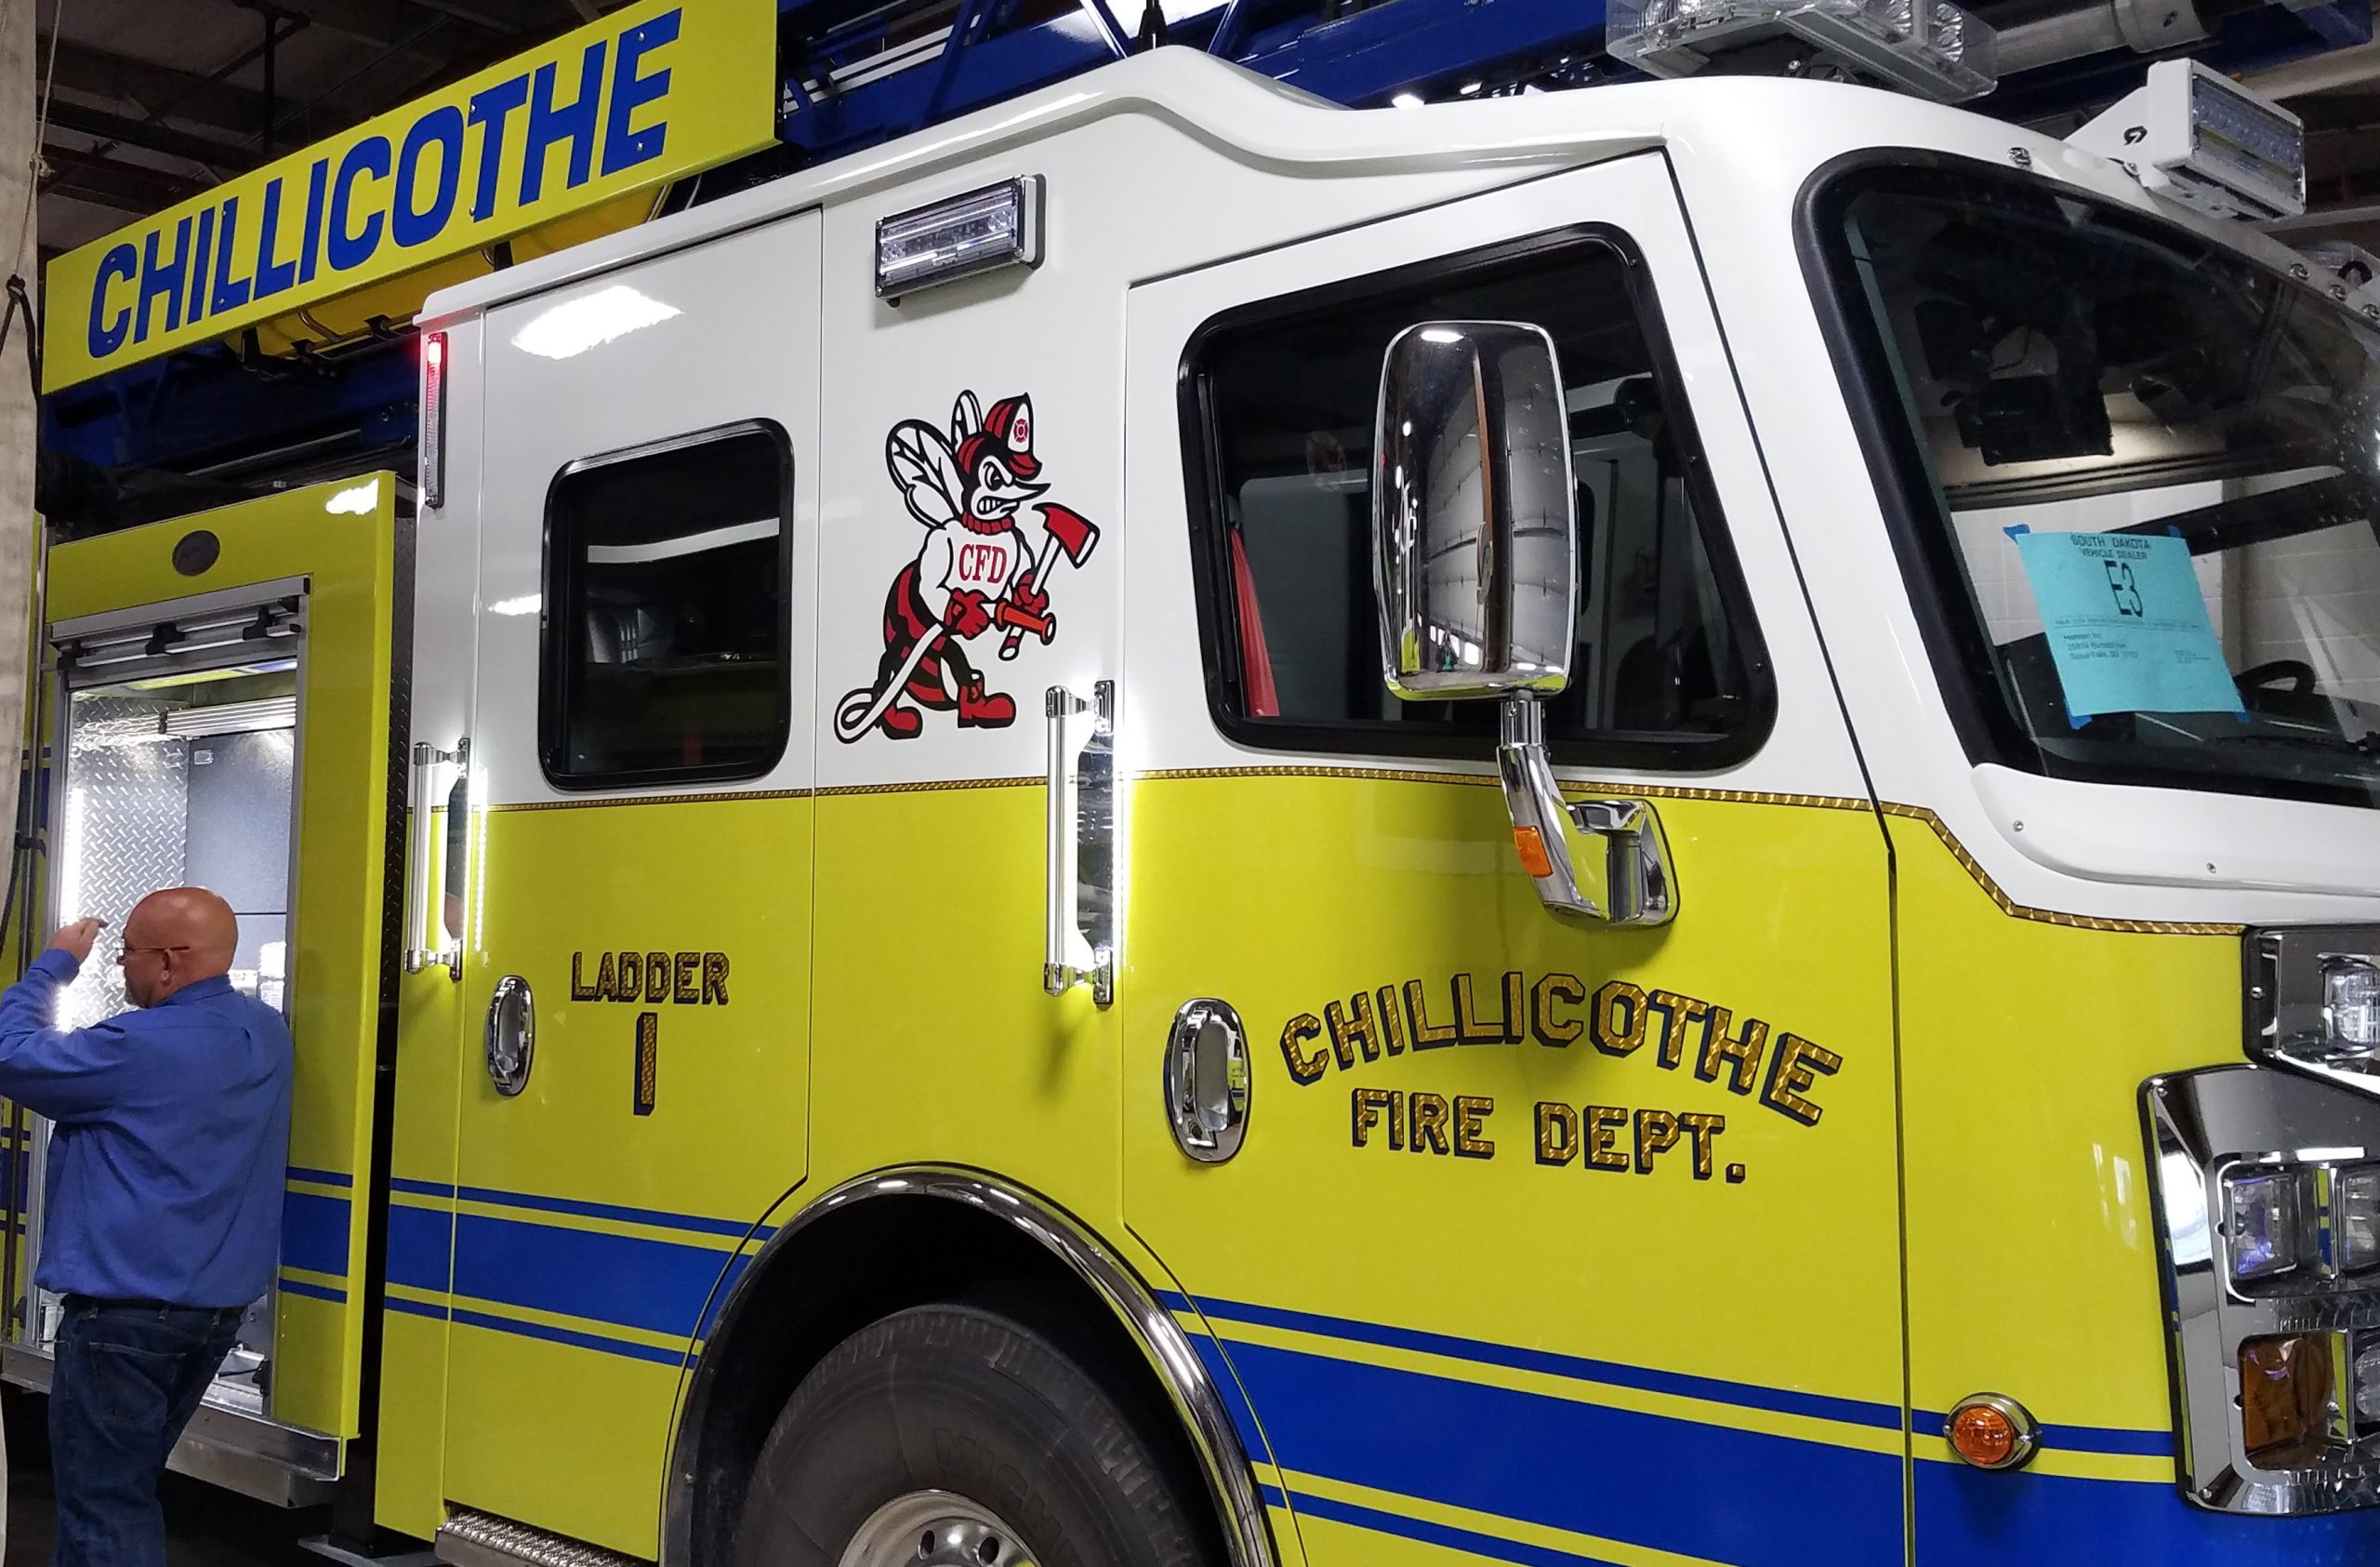 Firefighters Respond To Chimney Fire